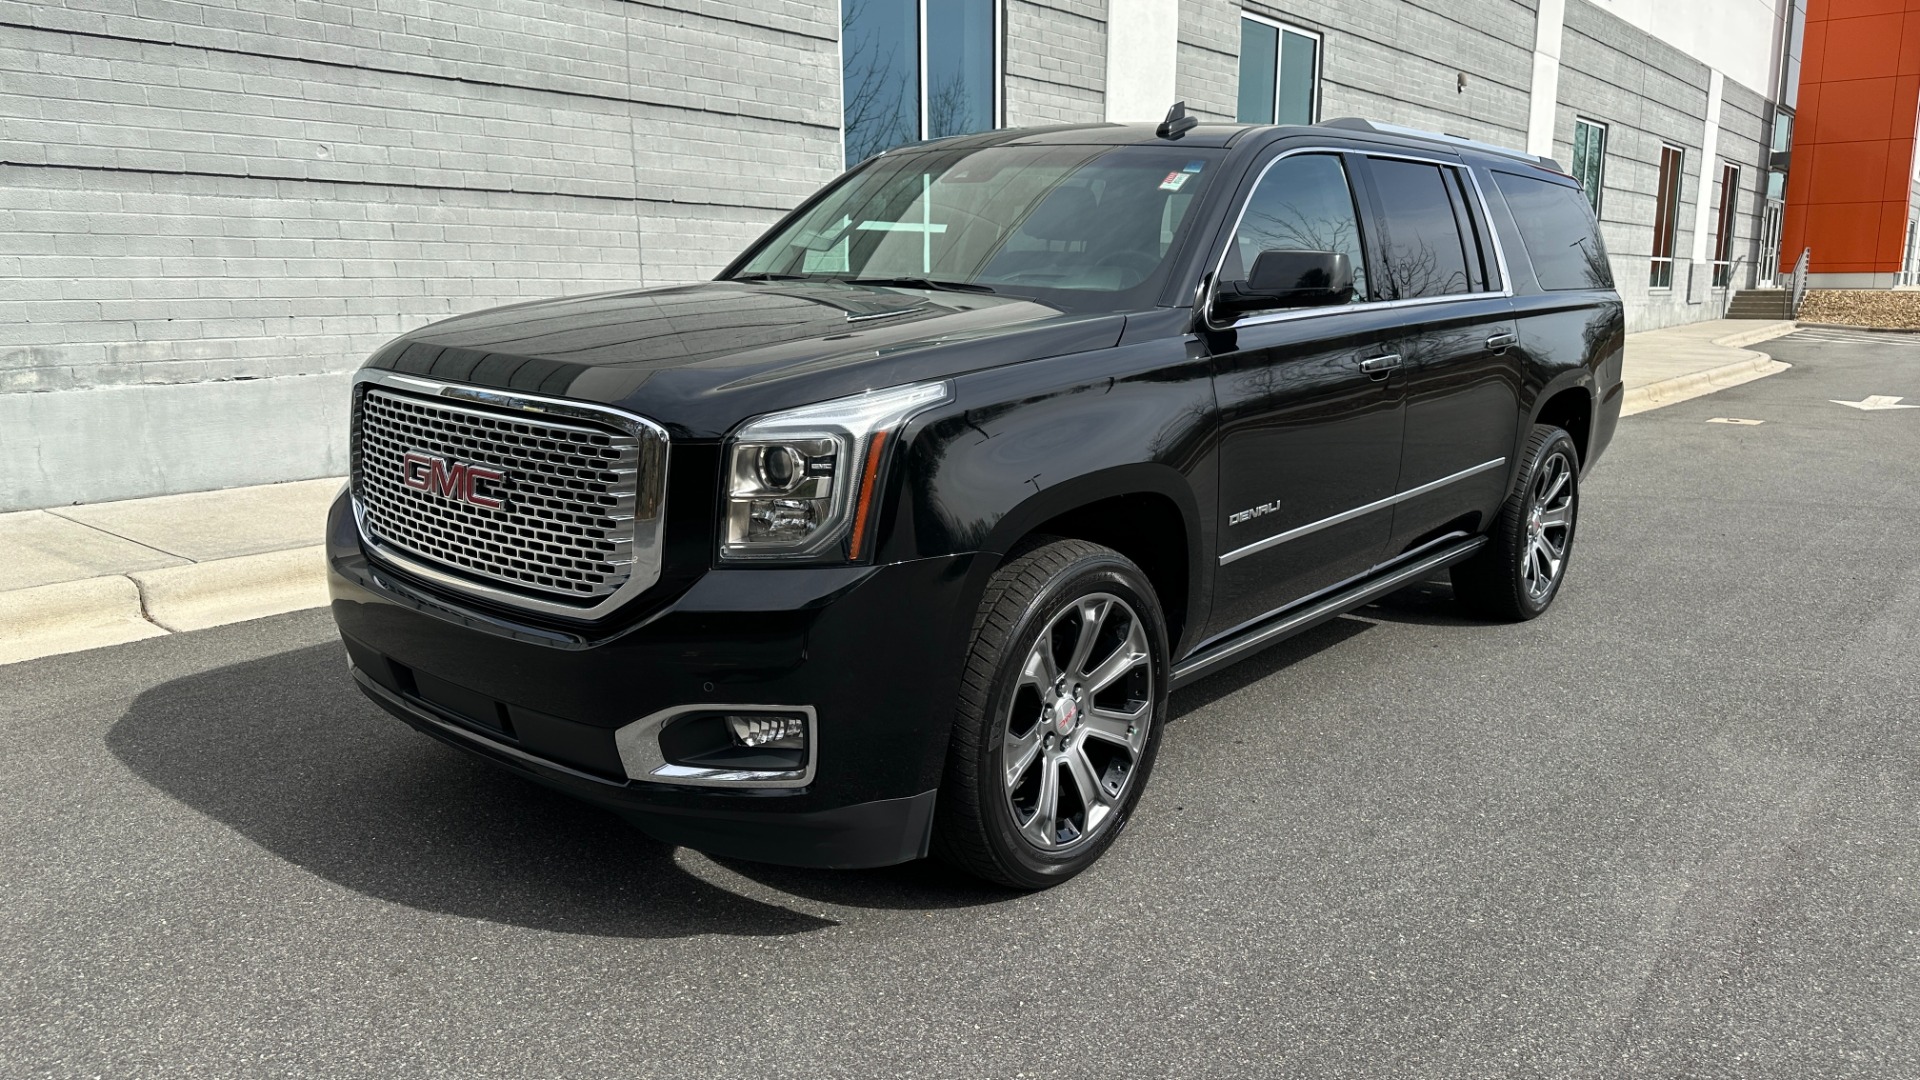 Used 2017 GMC Yukon XL DENALI / OPEN ROAD PACKAGE / 22IN WHEELS / REAR ENTERTAINMENT for sale Sold at Formula Imports in Charlotte NC 28227 2